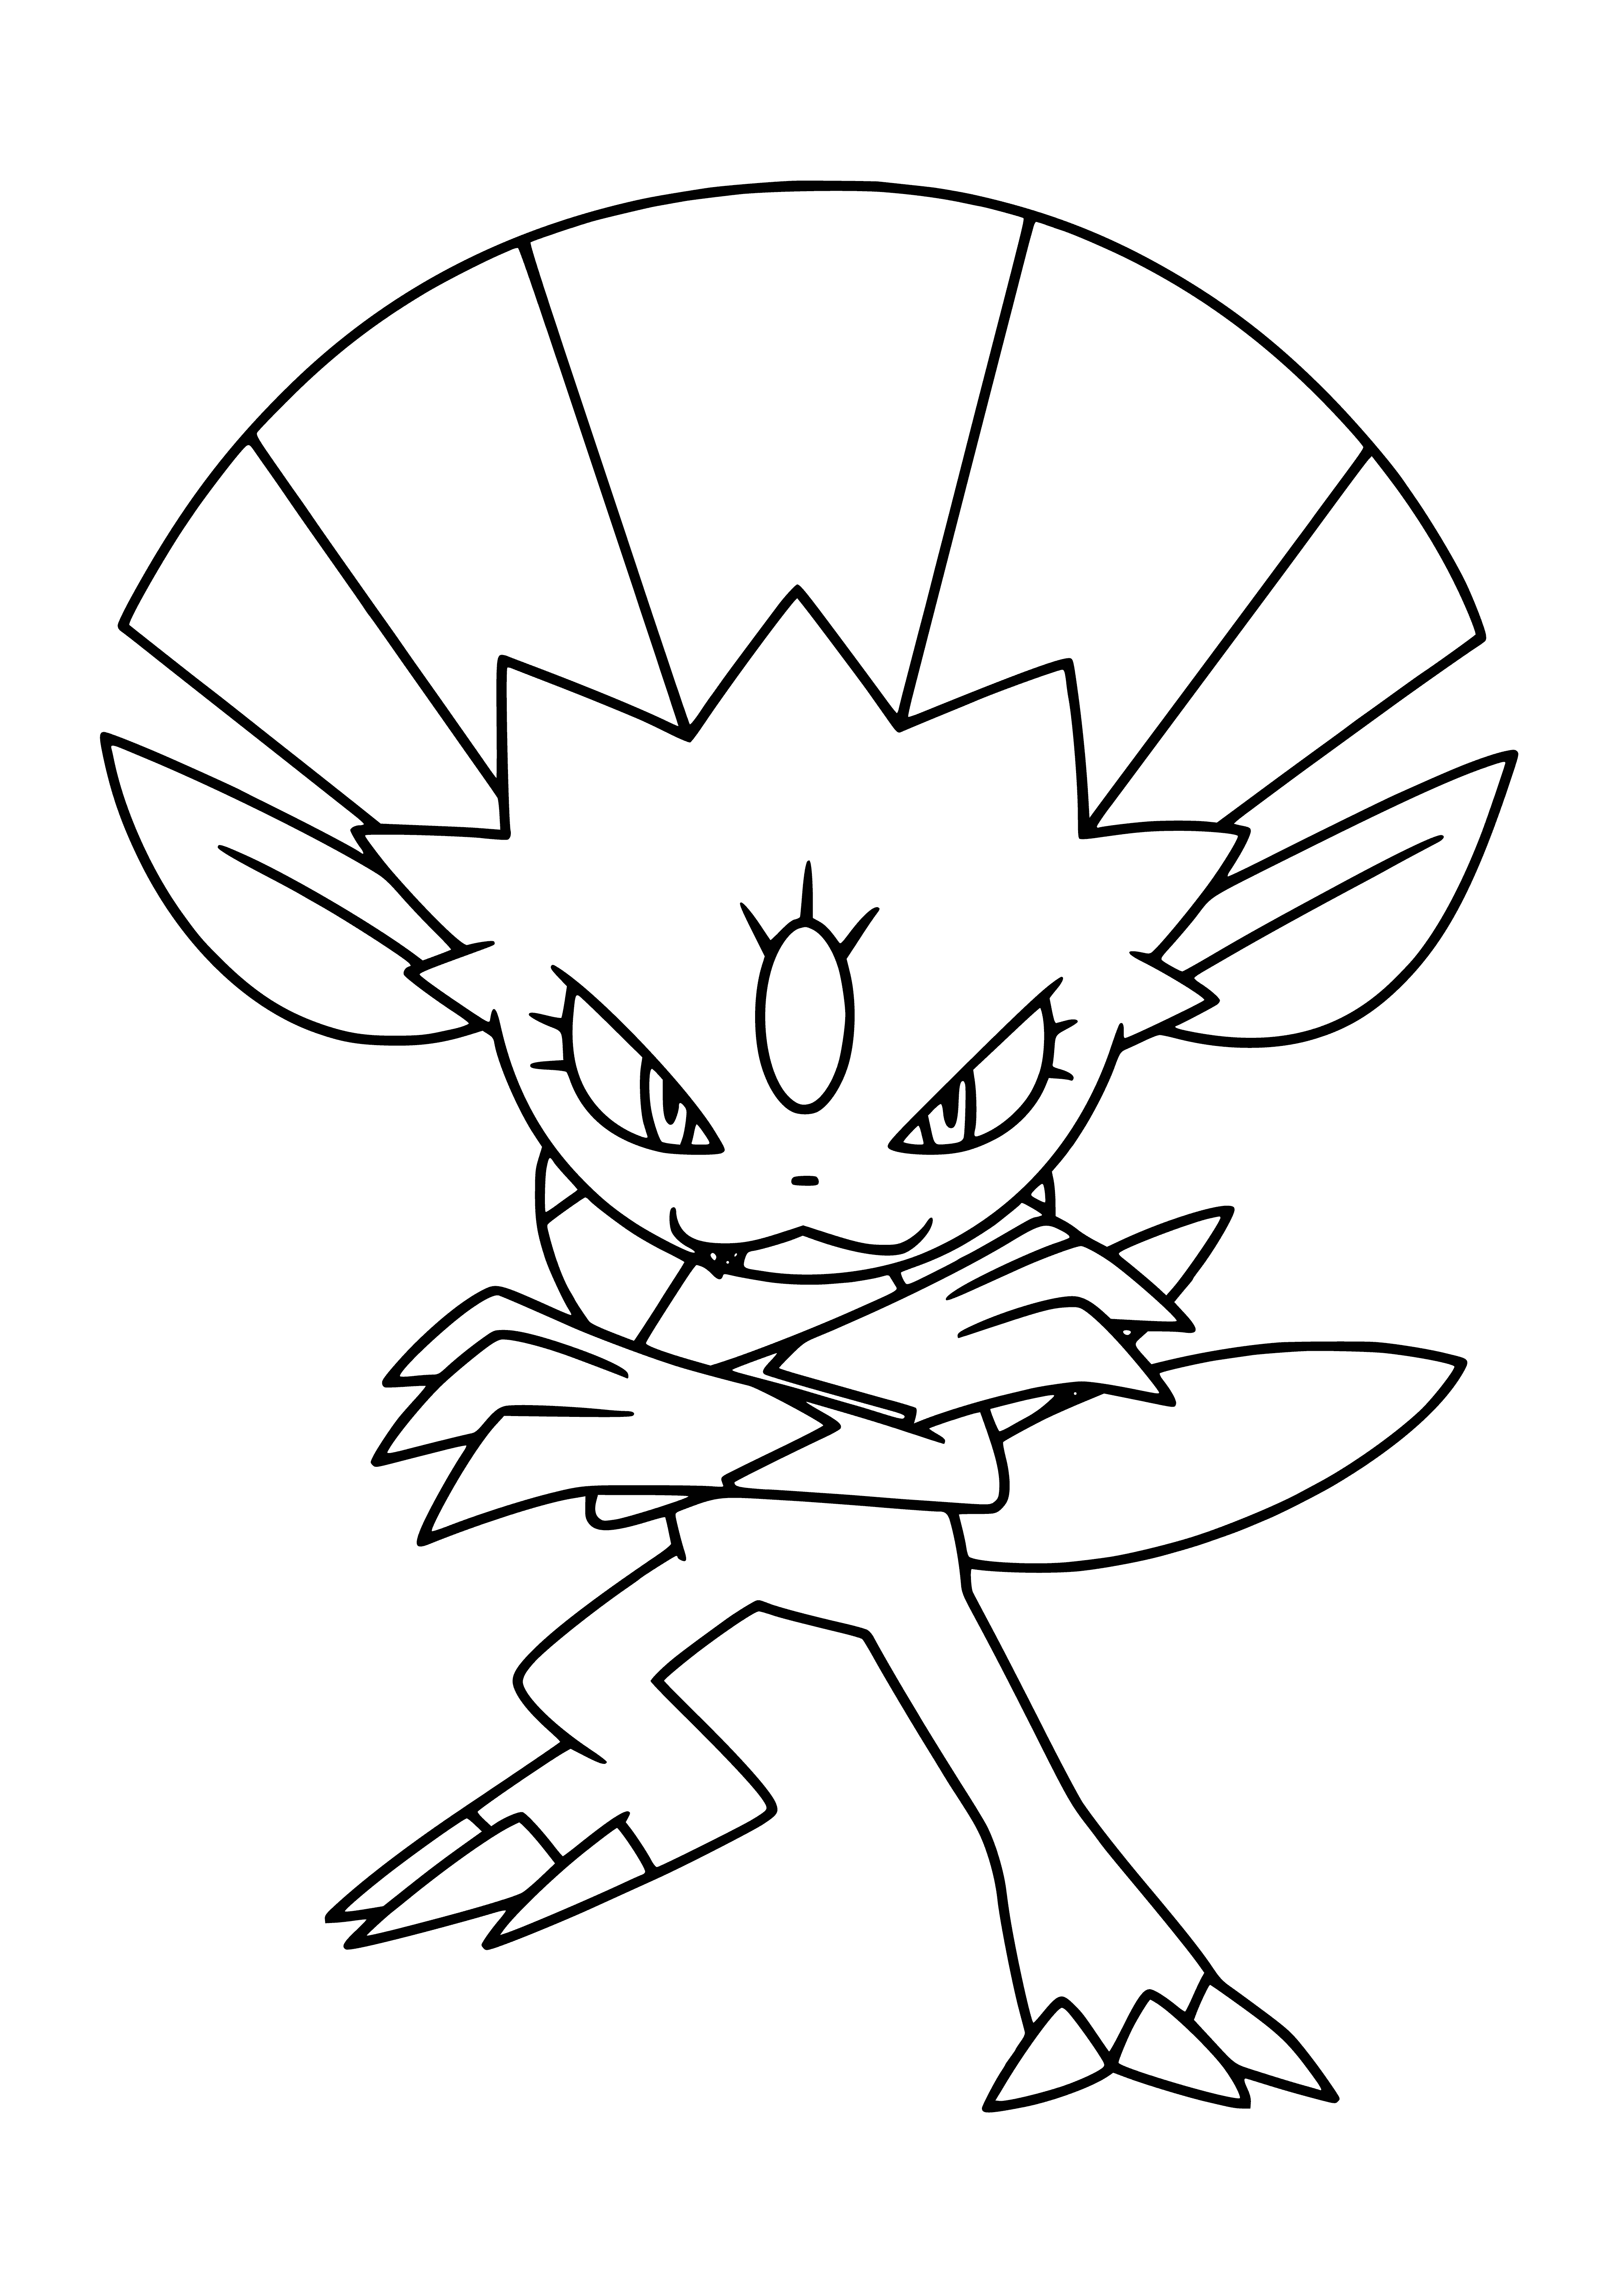 coloring page: Weavile is a dark/ice-type pokemon with sharp claws, black eyes, and a white body. It stands on two legs and has a long tail.